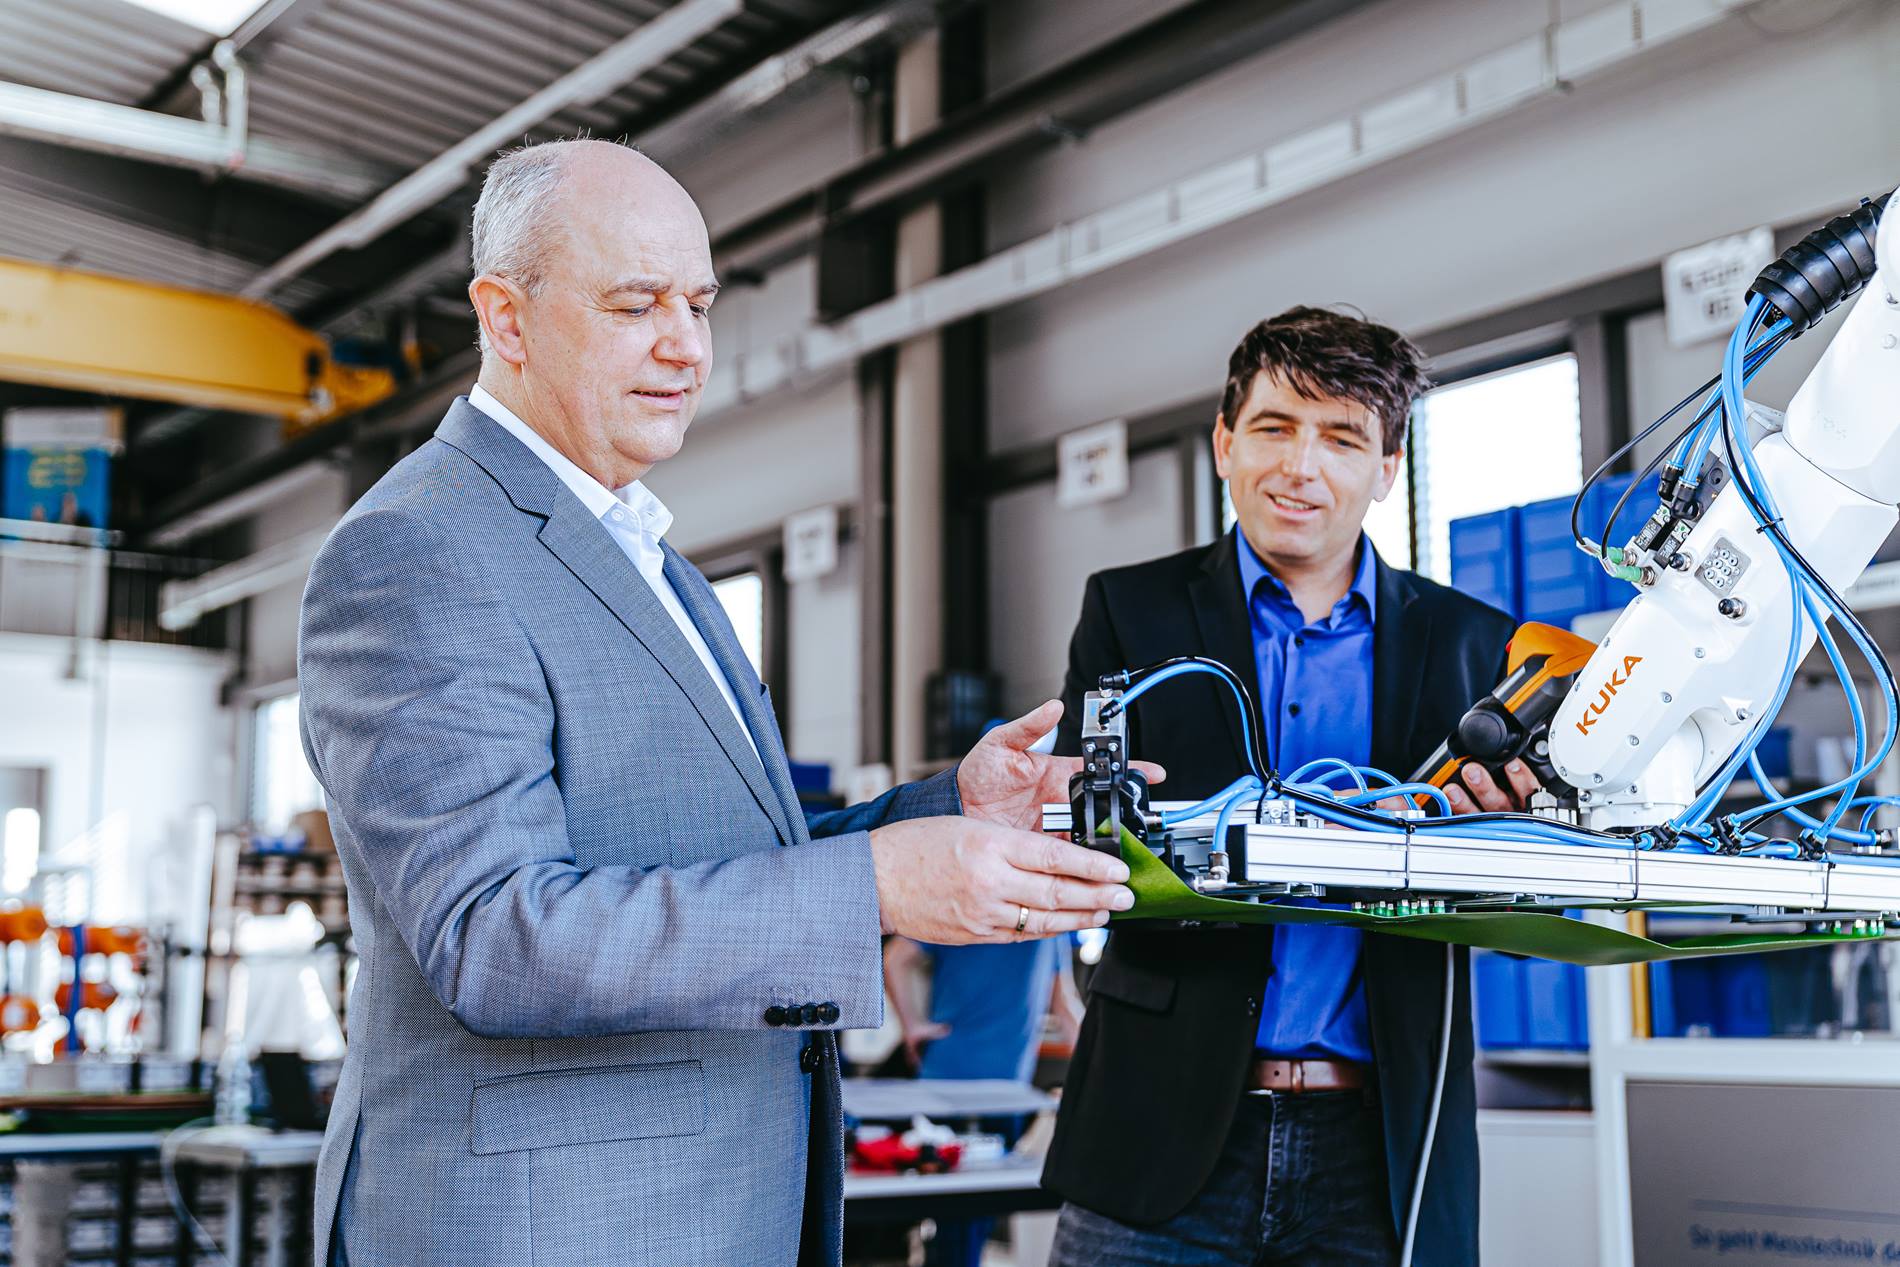 Michael Fraede and Michael Müller, the founders of robotextile, inspect a KUKA robot working in a textile production facility.  